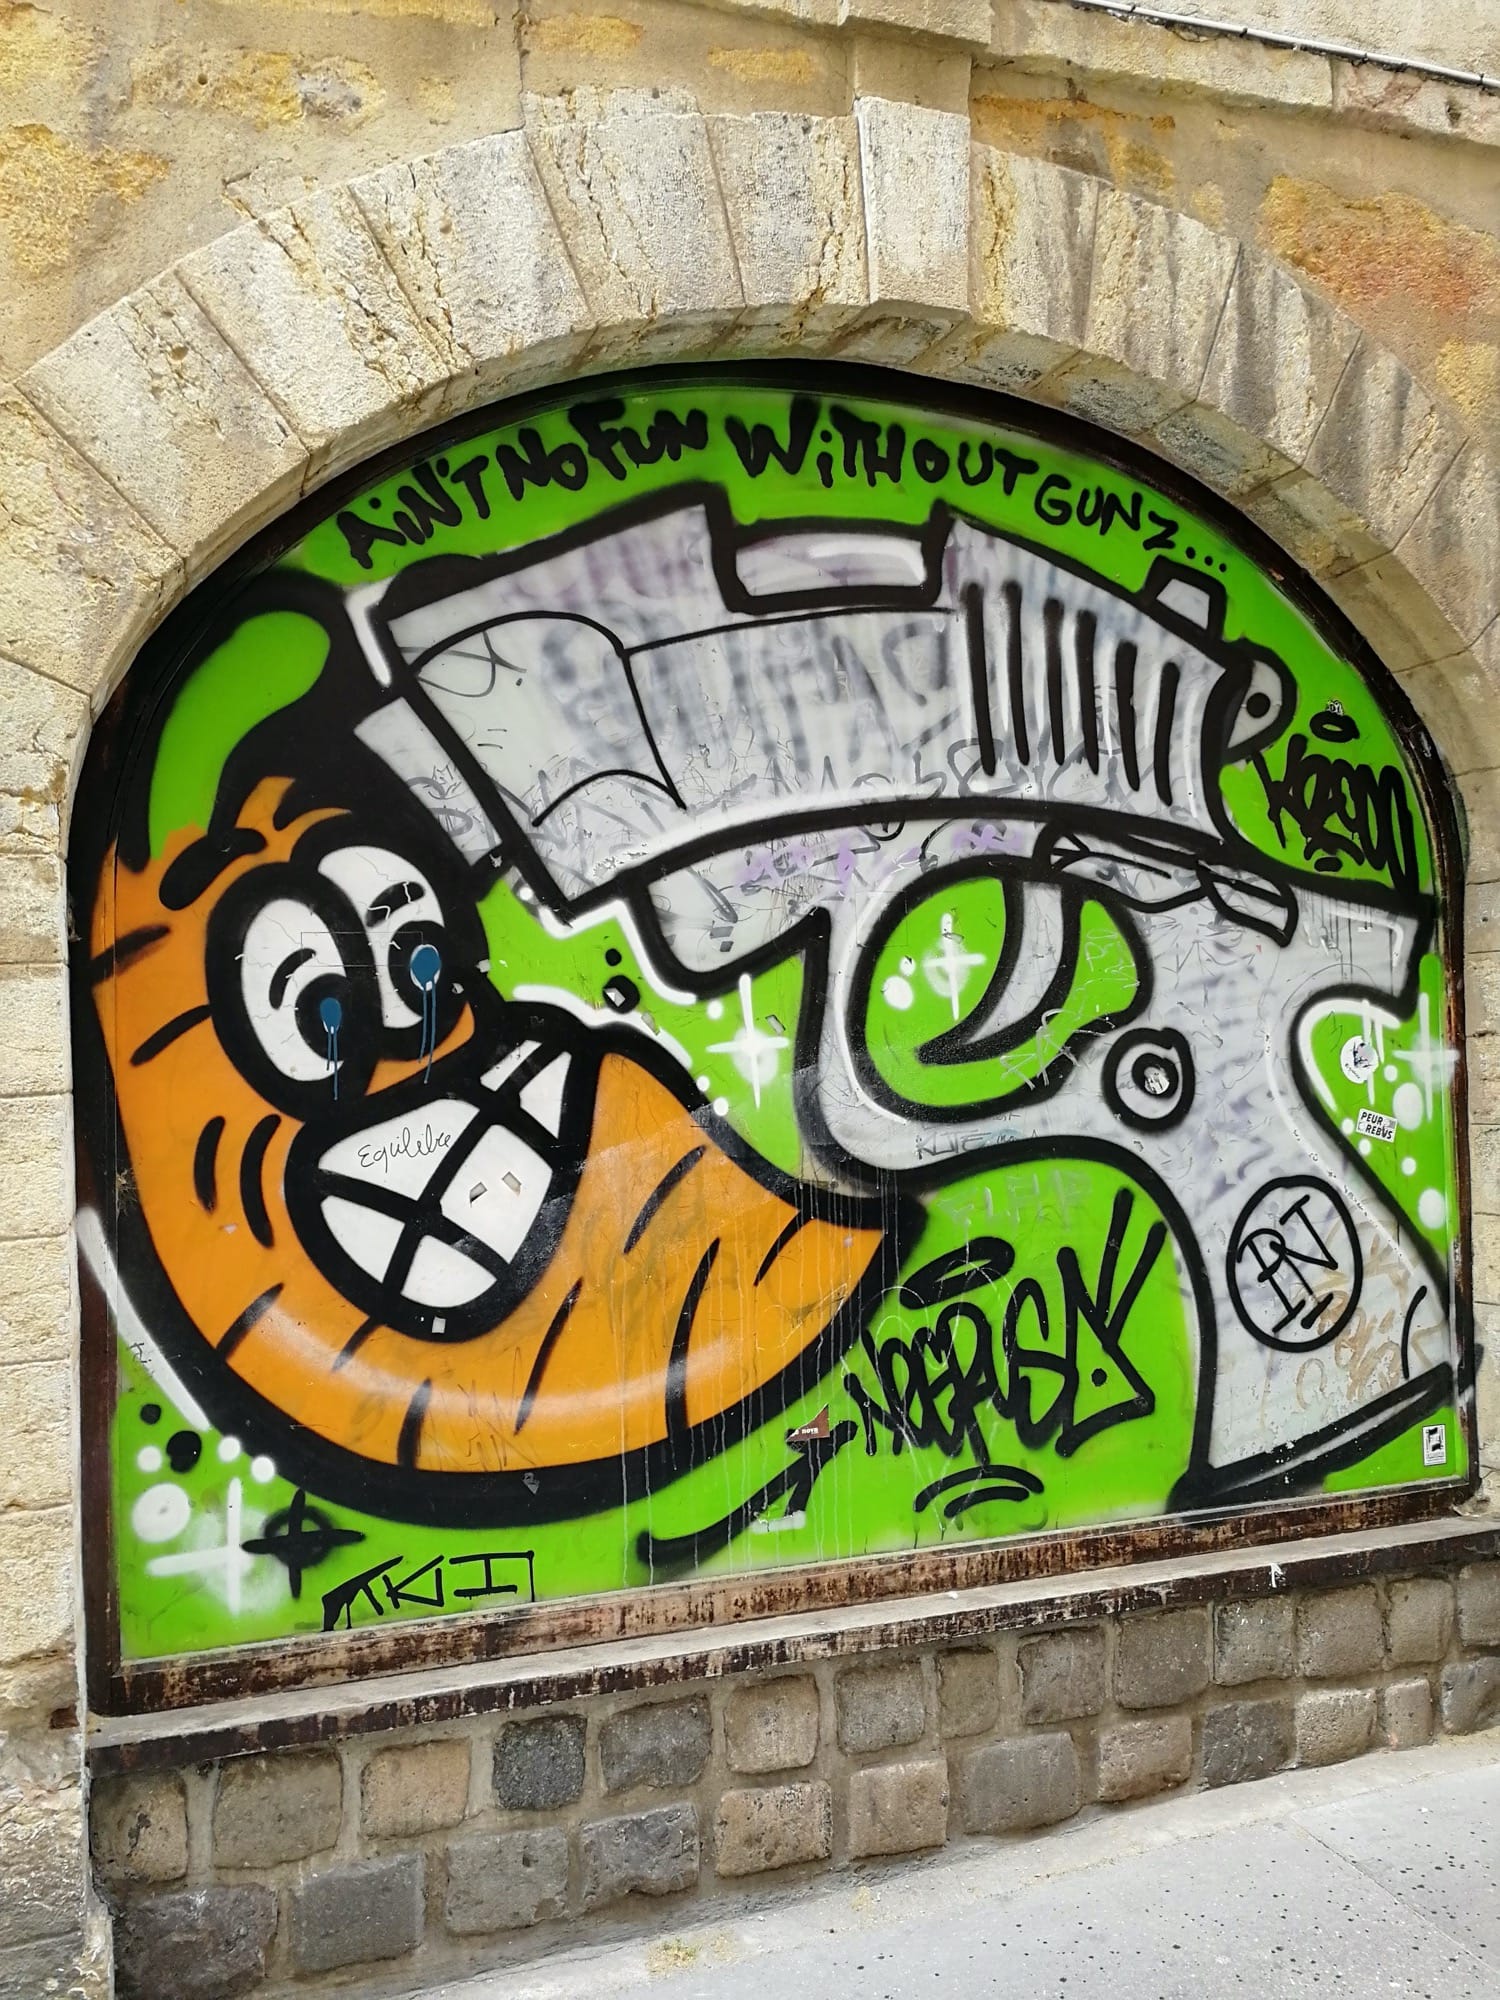 Graffiti 1549 Ain't no fun without gunz captured by Rabot in Lyon France